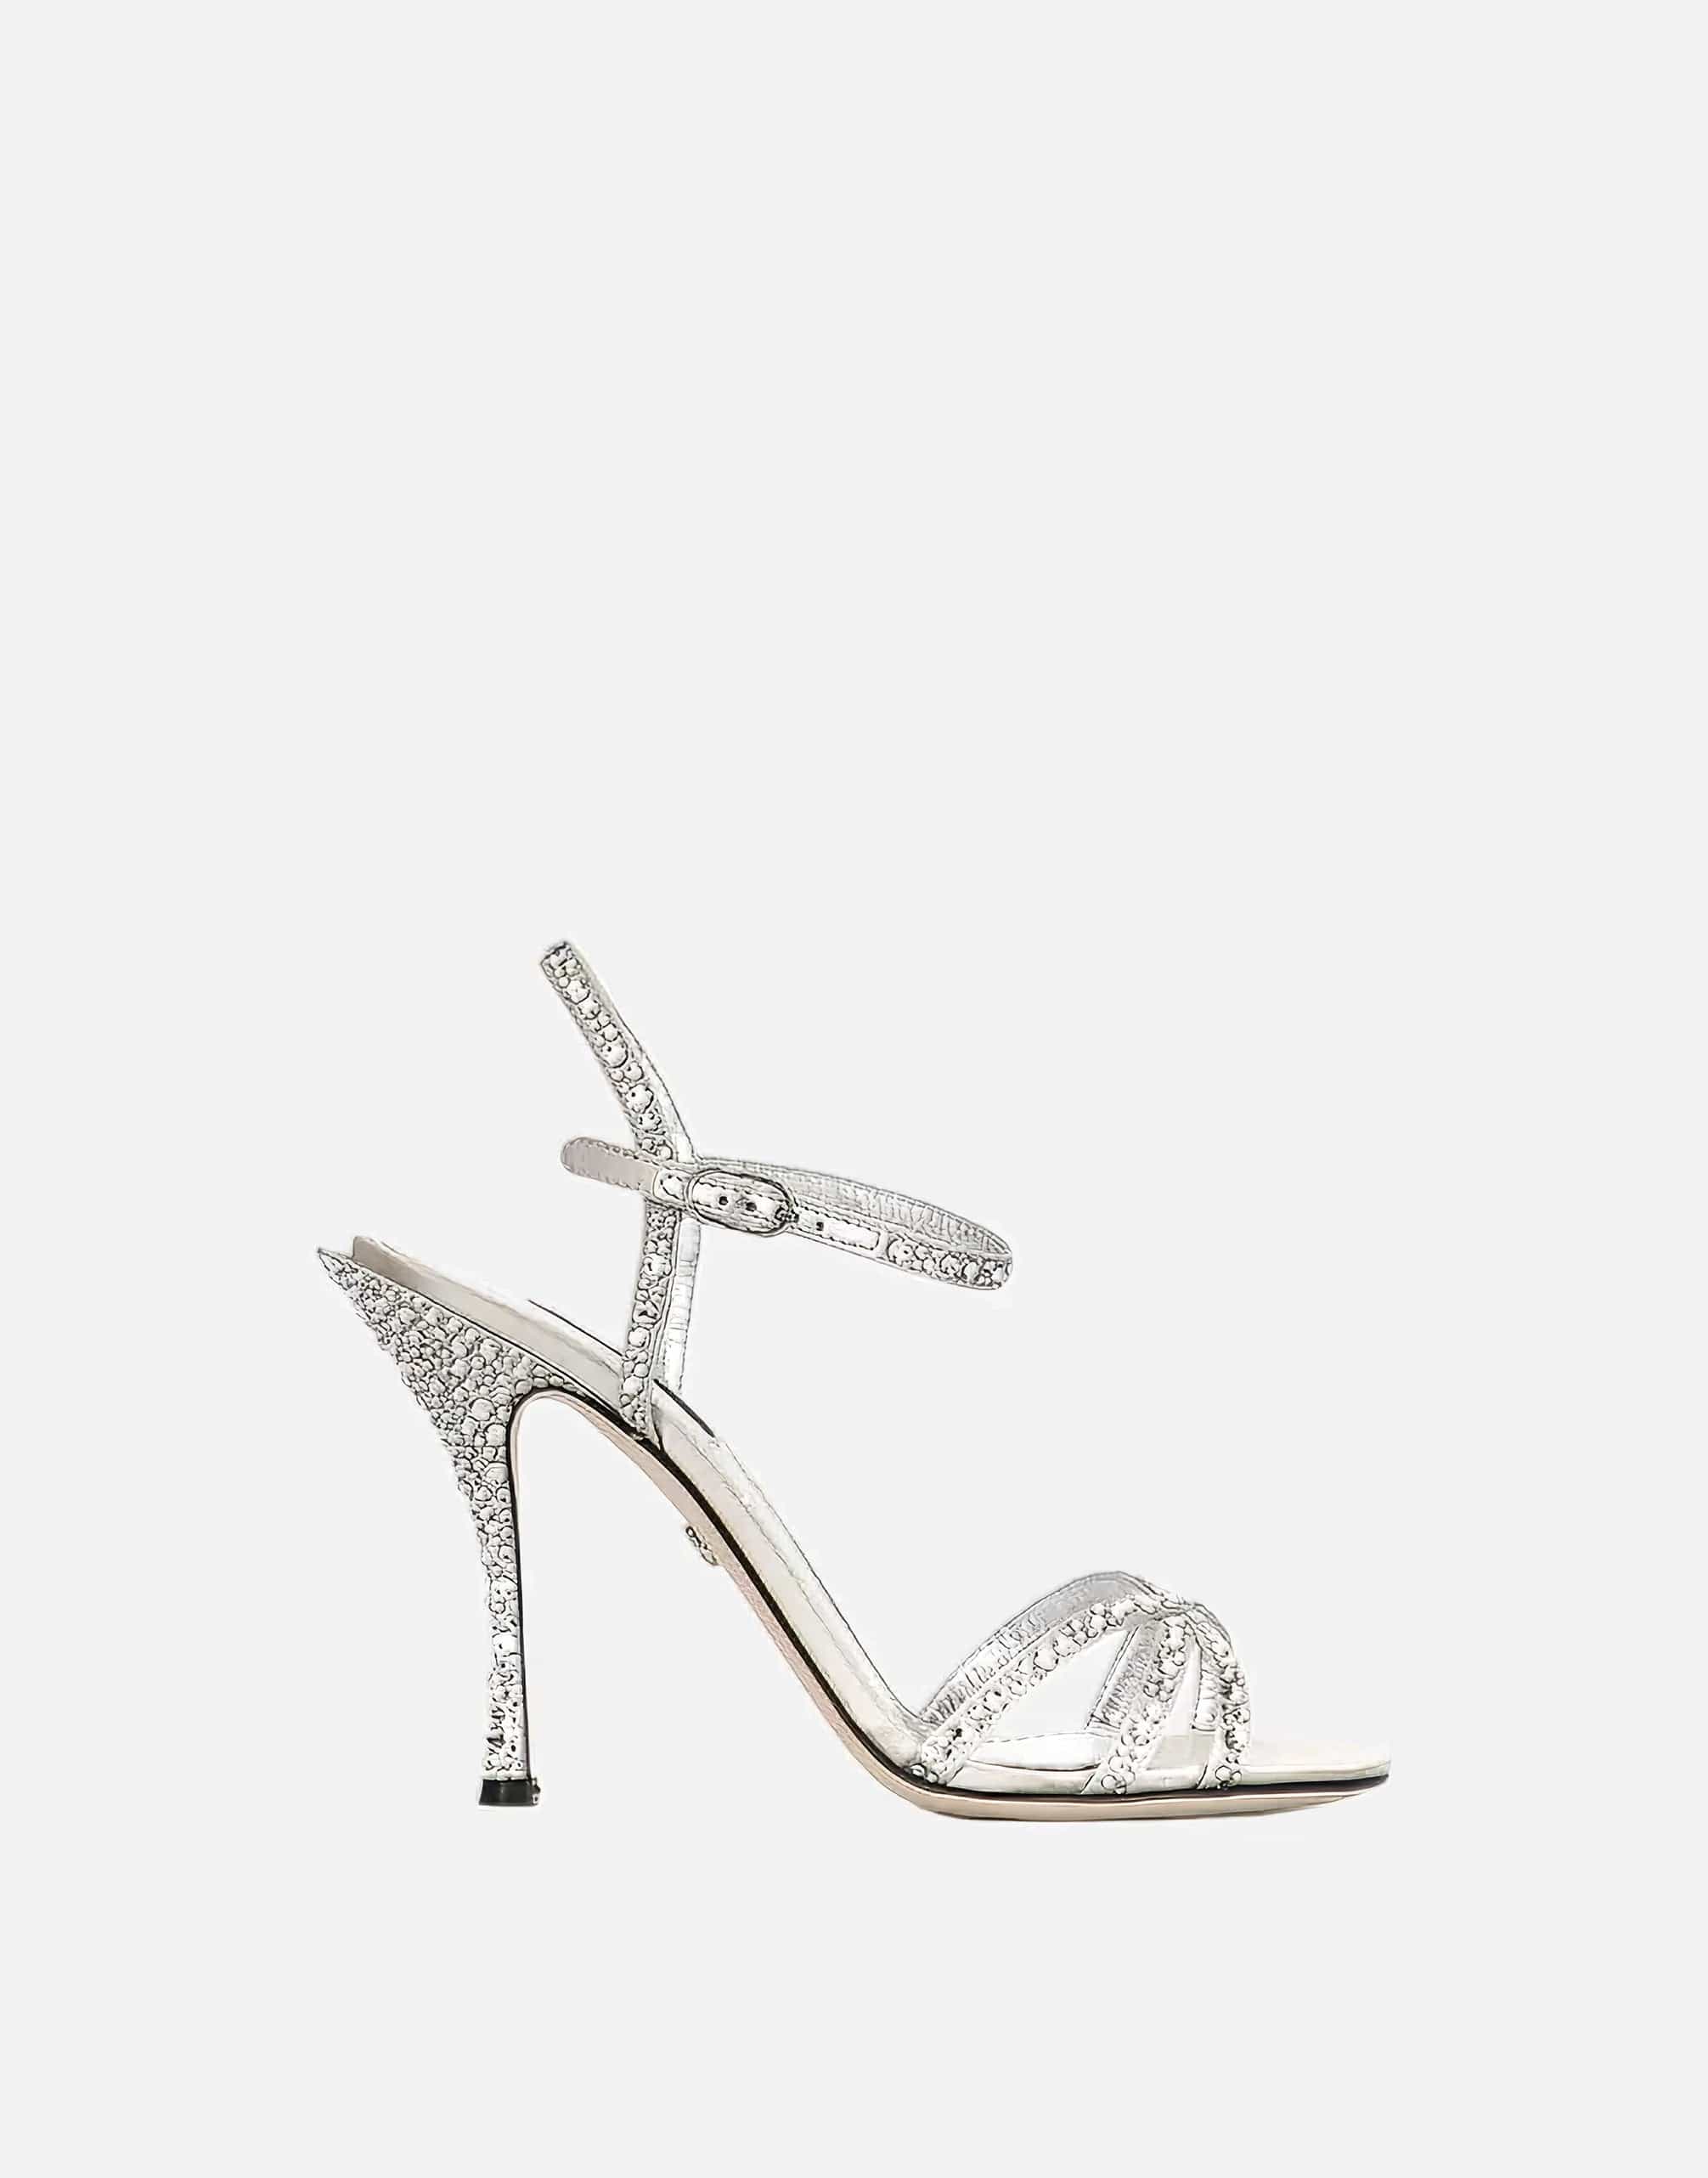 Dolce & Gabbana Satin Sandals With Fusible Rhinestone Detailing